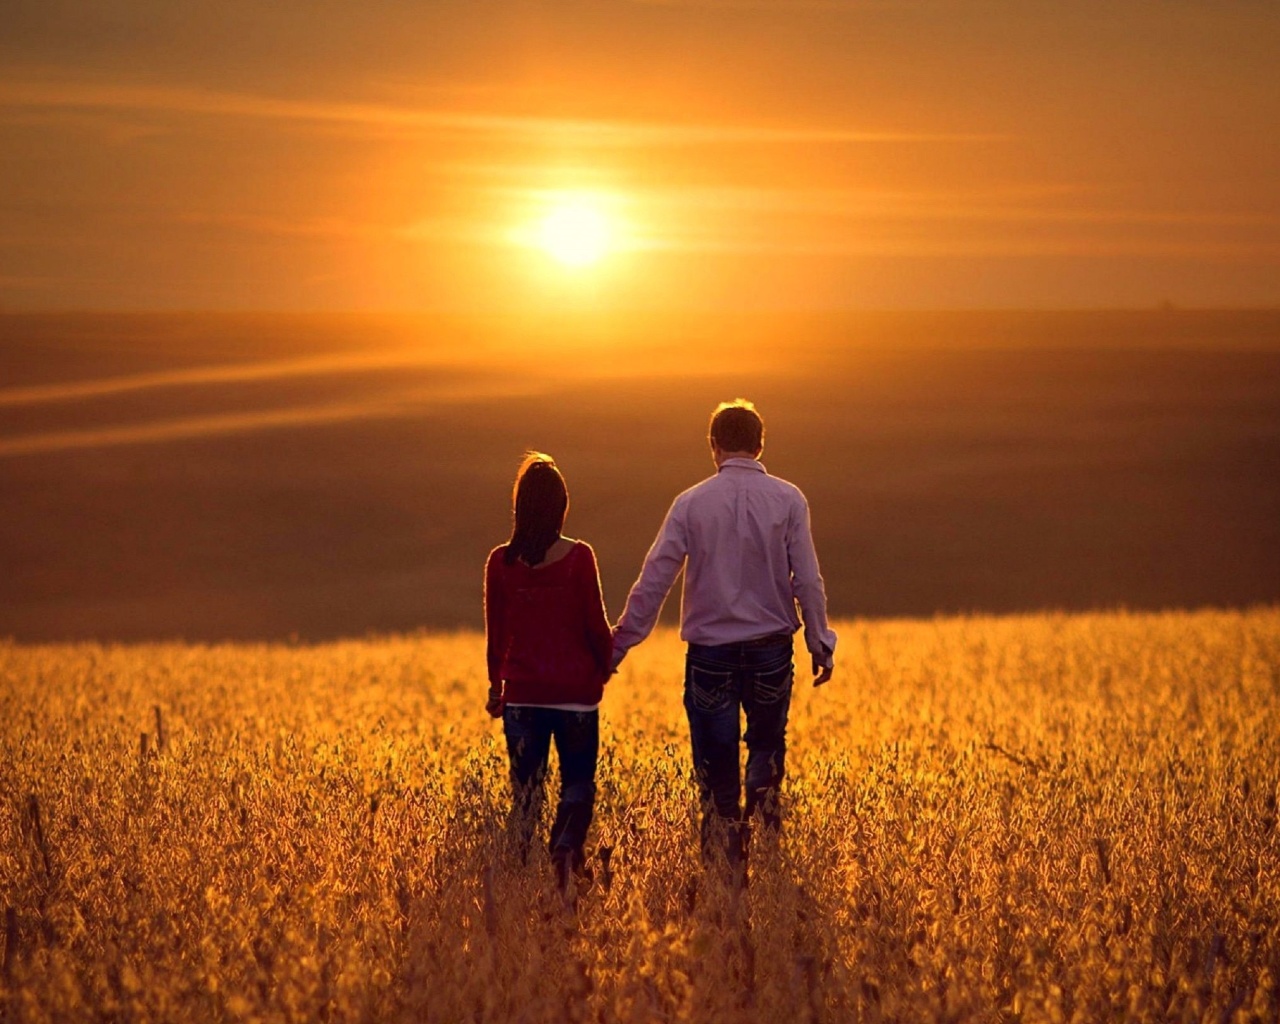 Couple at sunset wallpaper 1280x1024